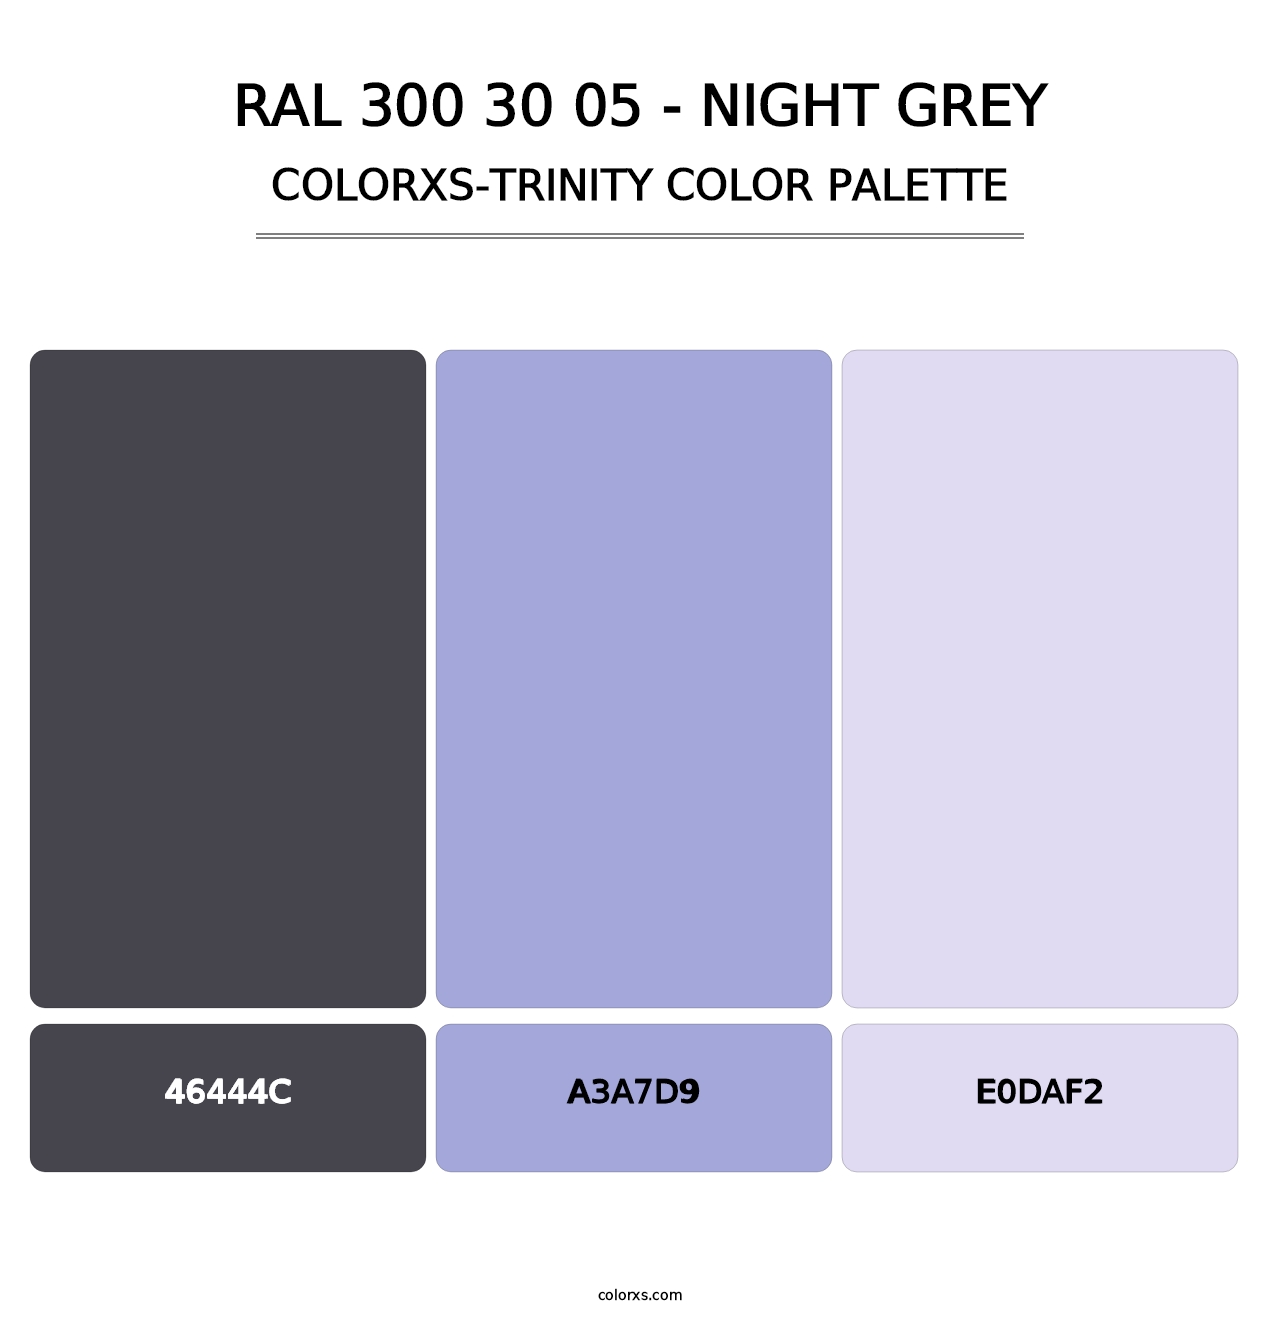 RAL 300 30 05 - Night Grey - Colorxs Trinity Palette